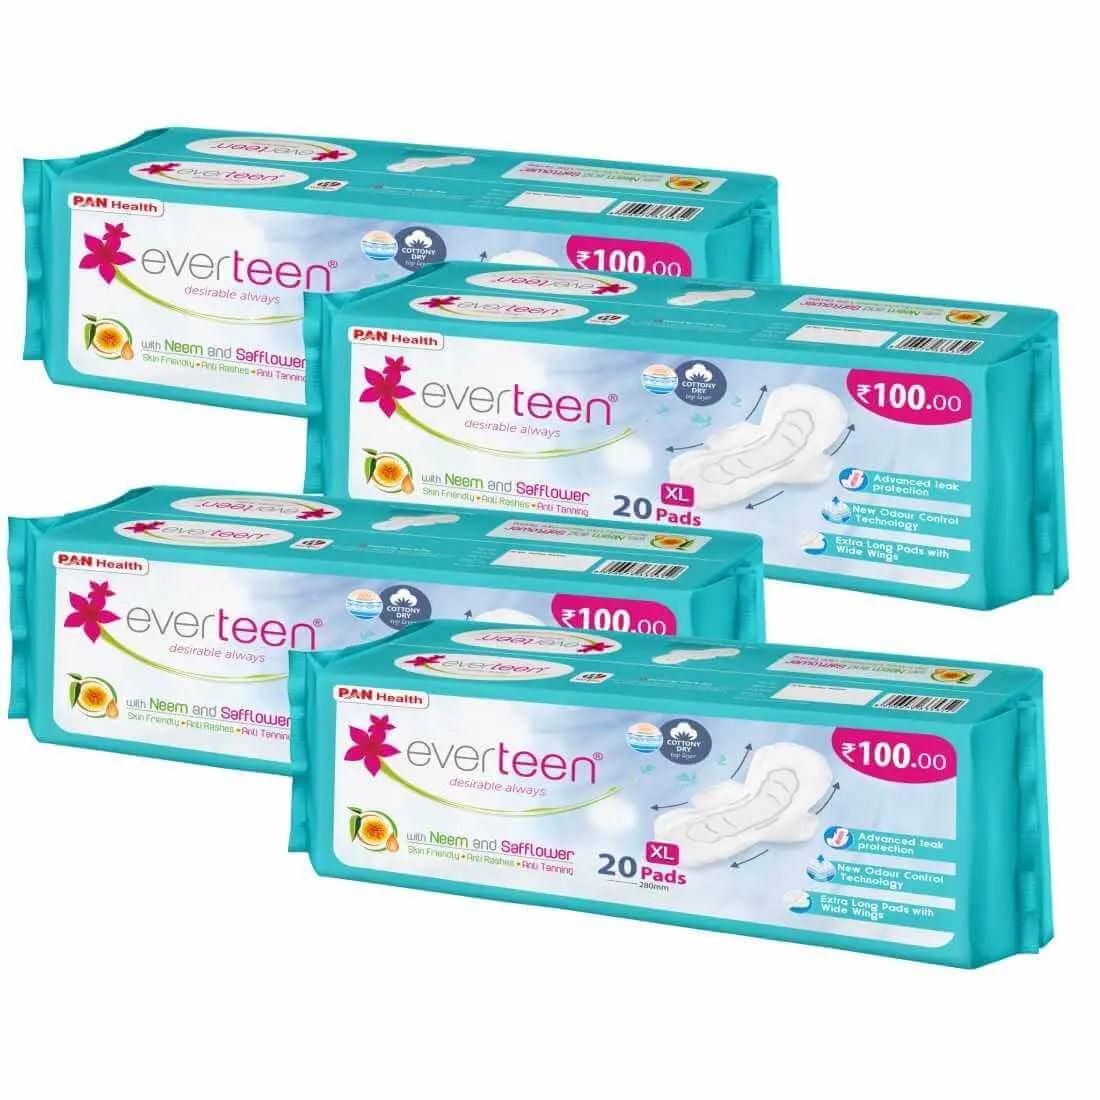 everteen XL Sanitary Napkin Pads with Neem and Safflower for Women - 20 Pads, 280mm 8903540010749